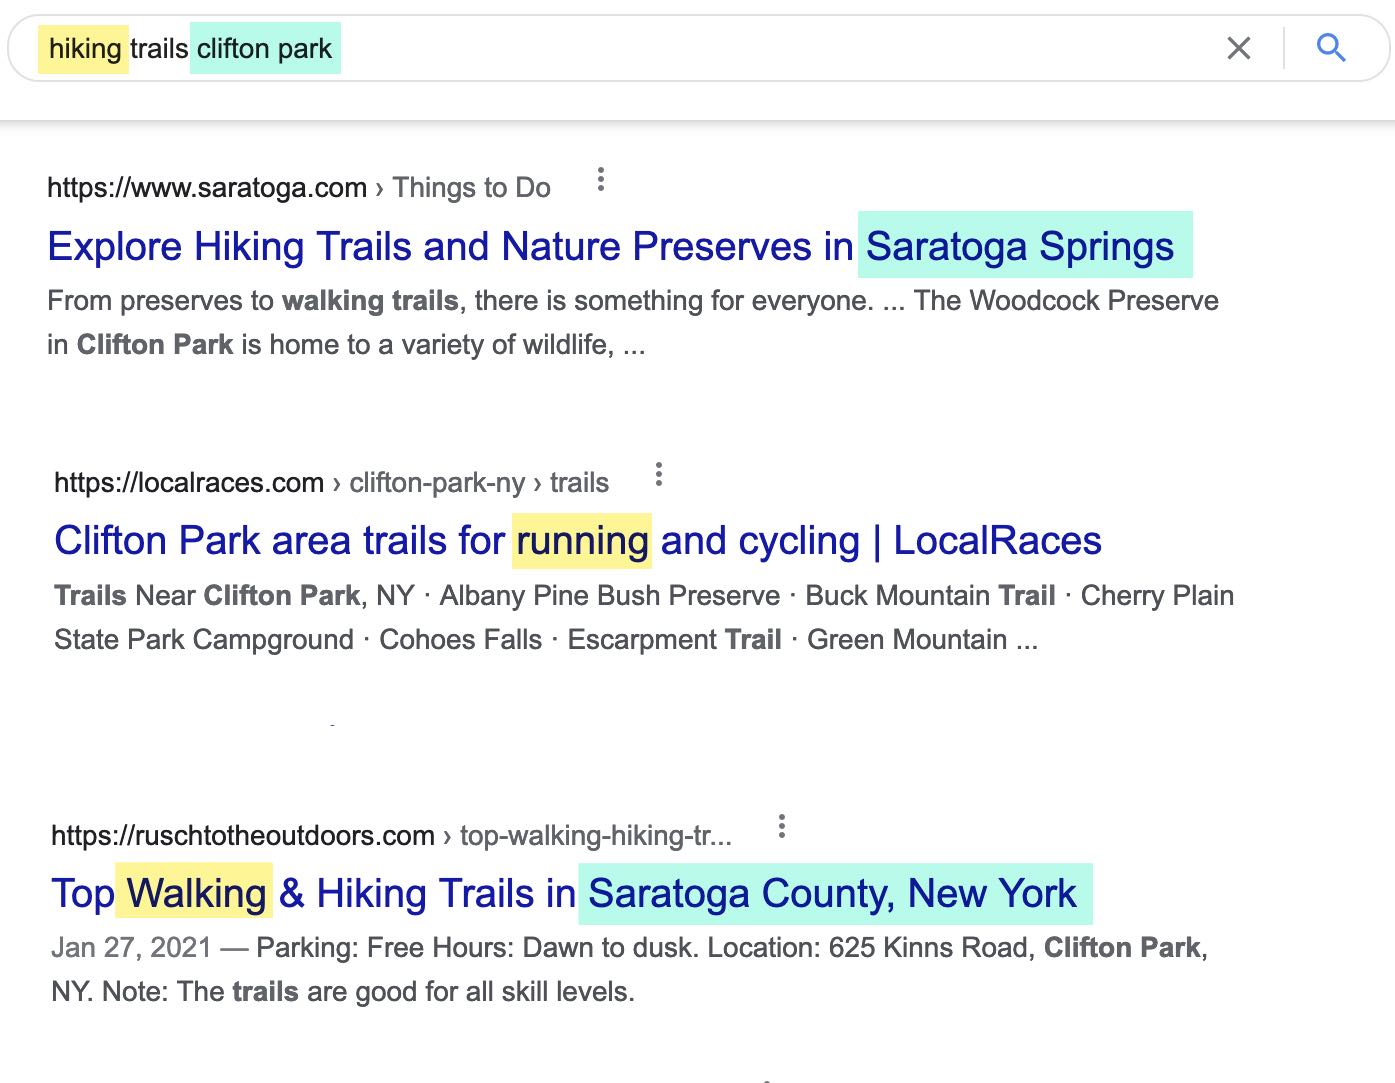 Screenshot of Google search results for "hiking trails clifton park."